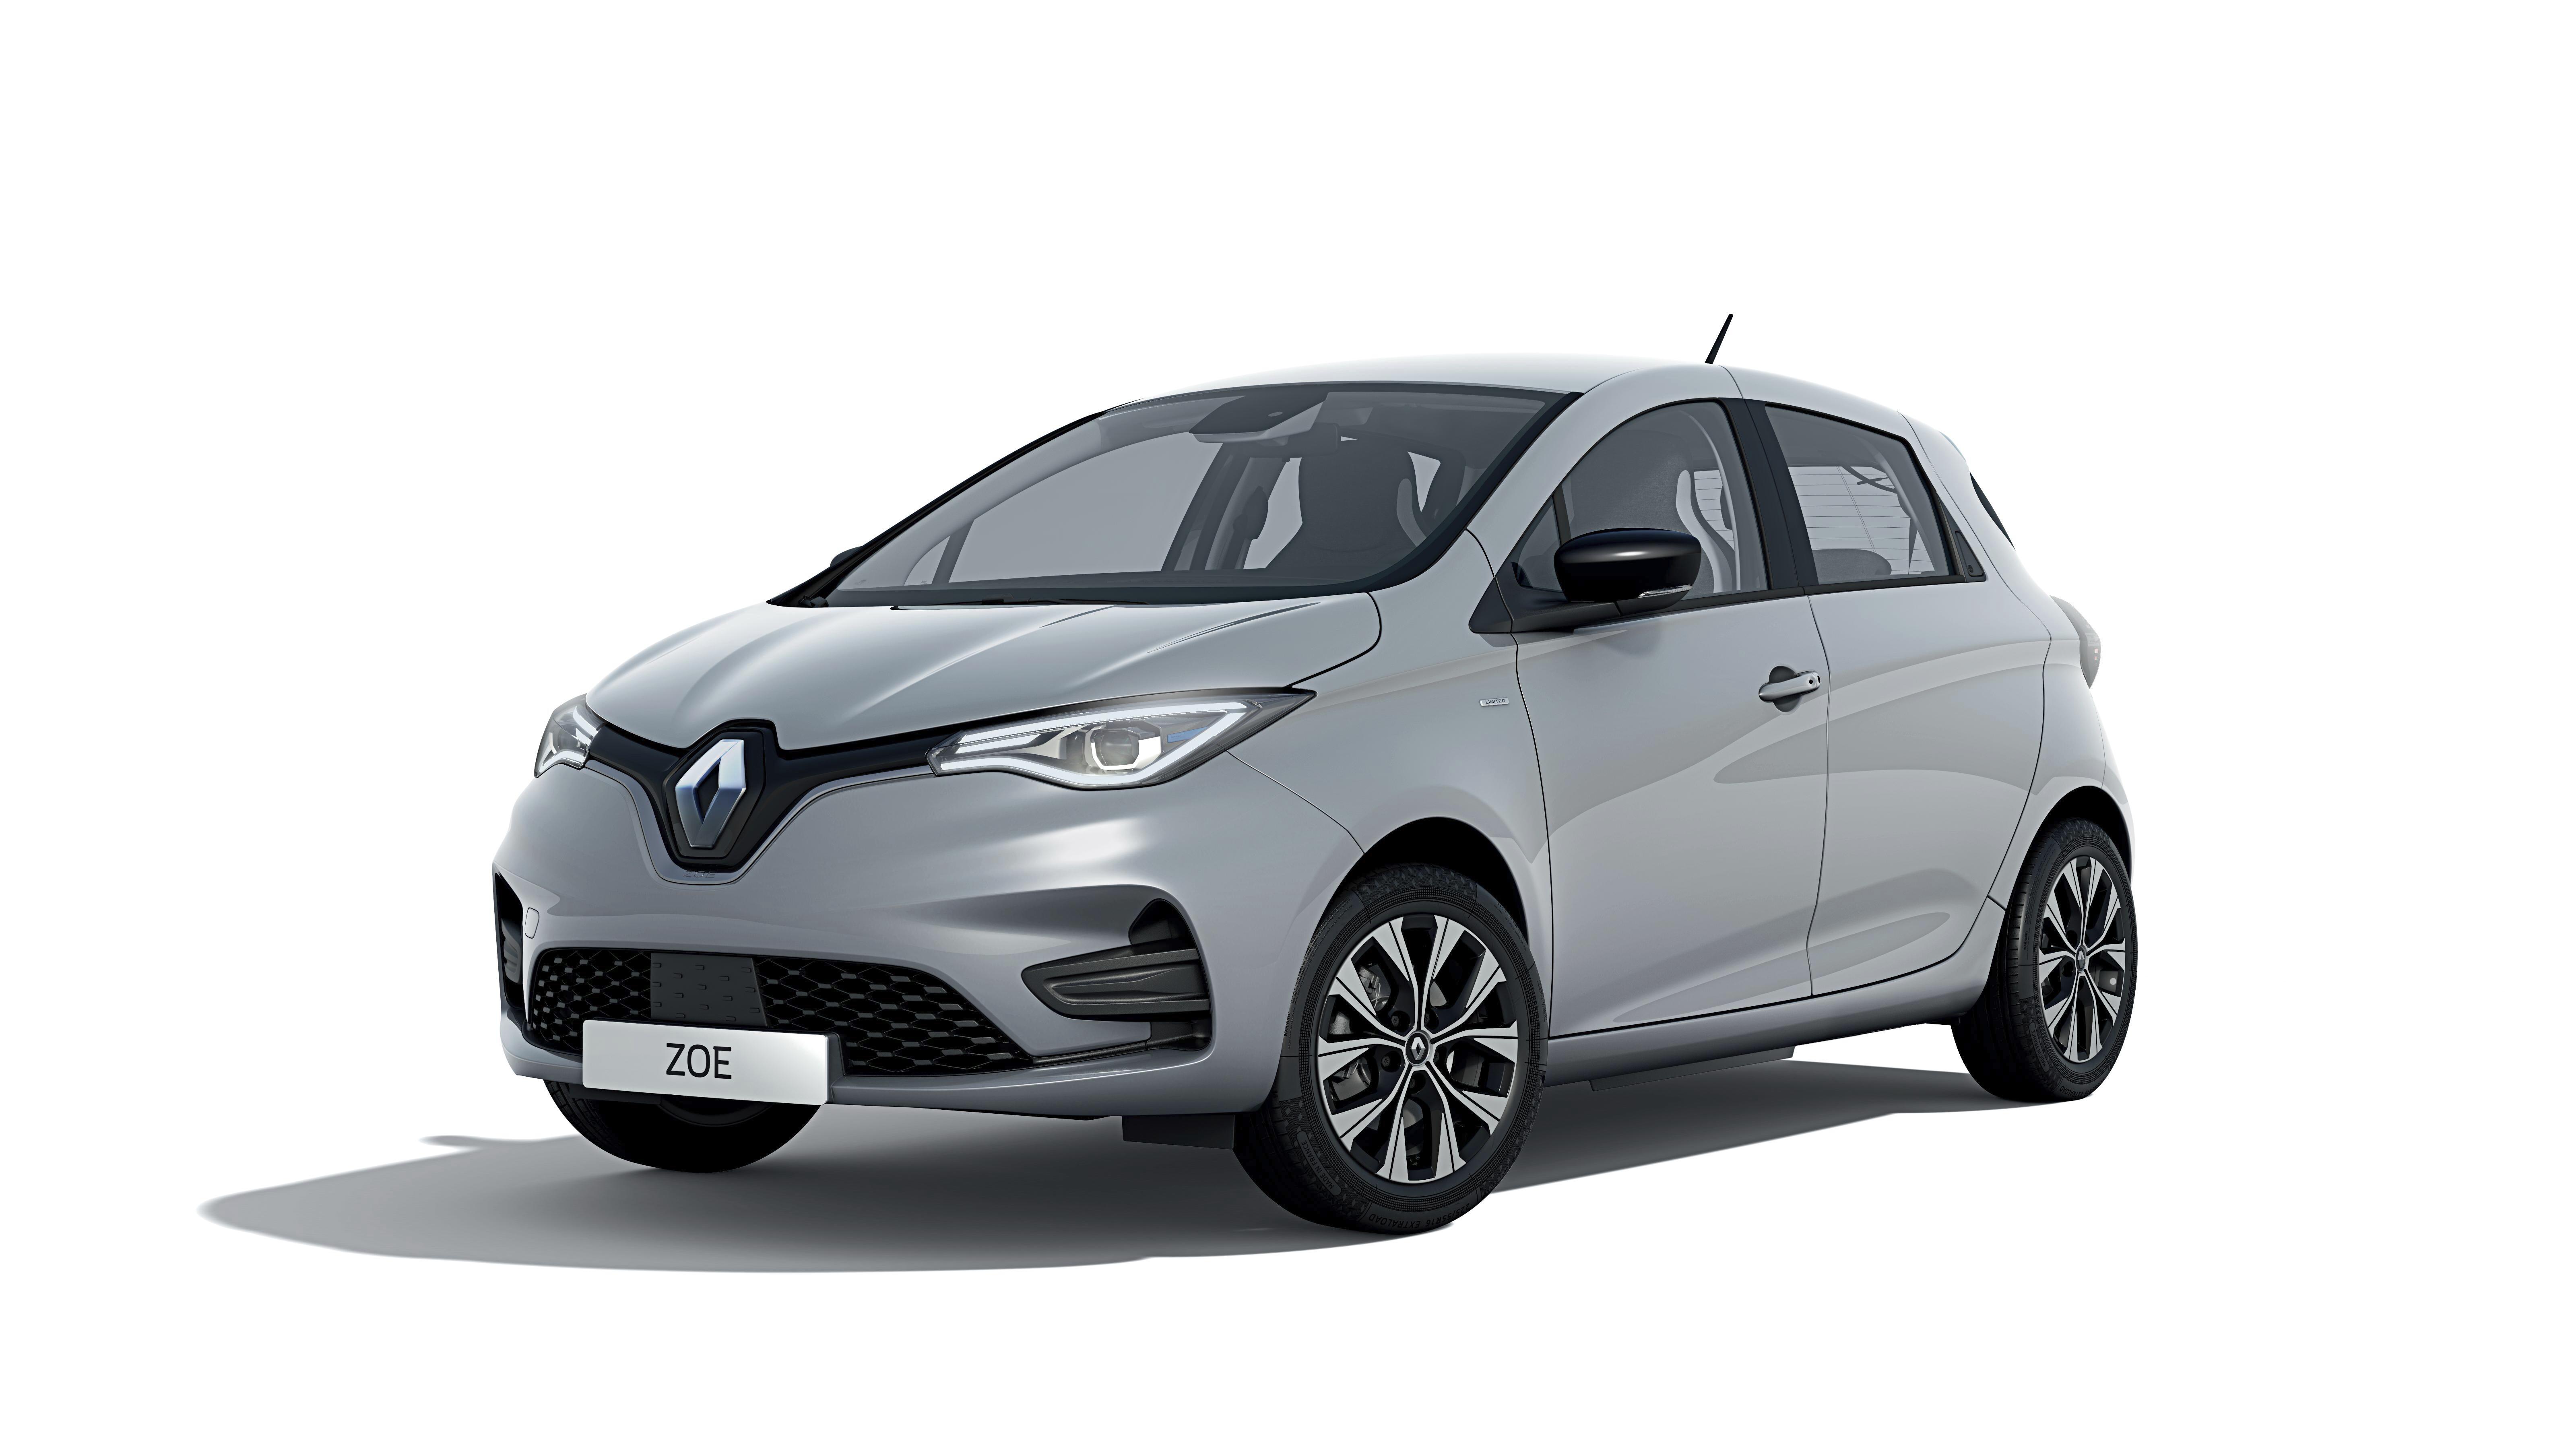 https://electrek.co/wp-content/uploads/sites/3/2021/12/Renault-ZOE-Limited-2021.jpg?quality=82&strip=all